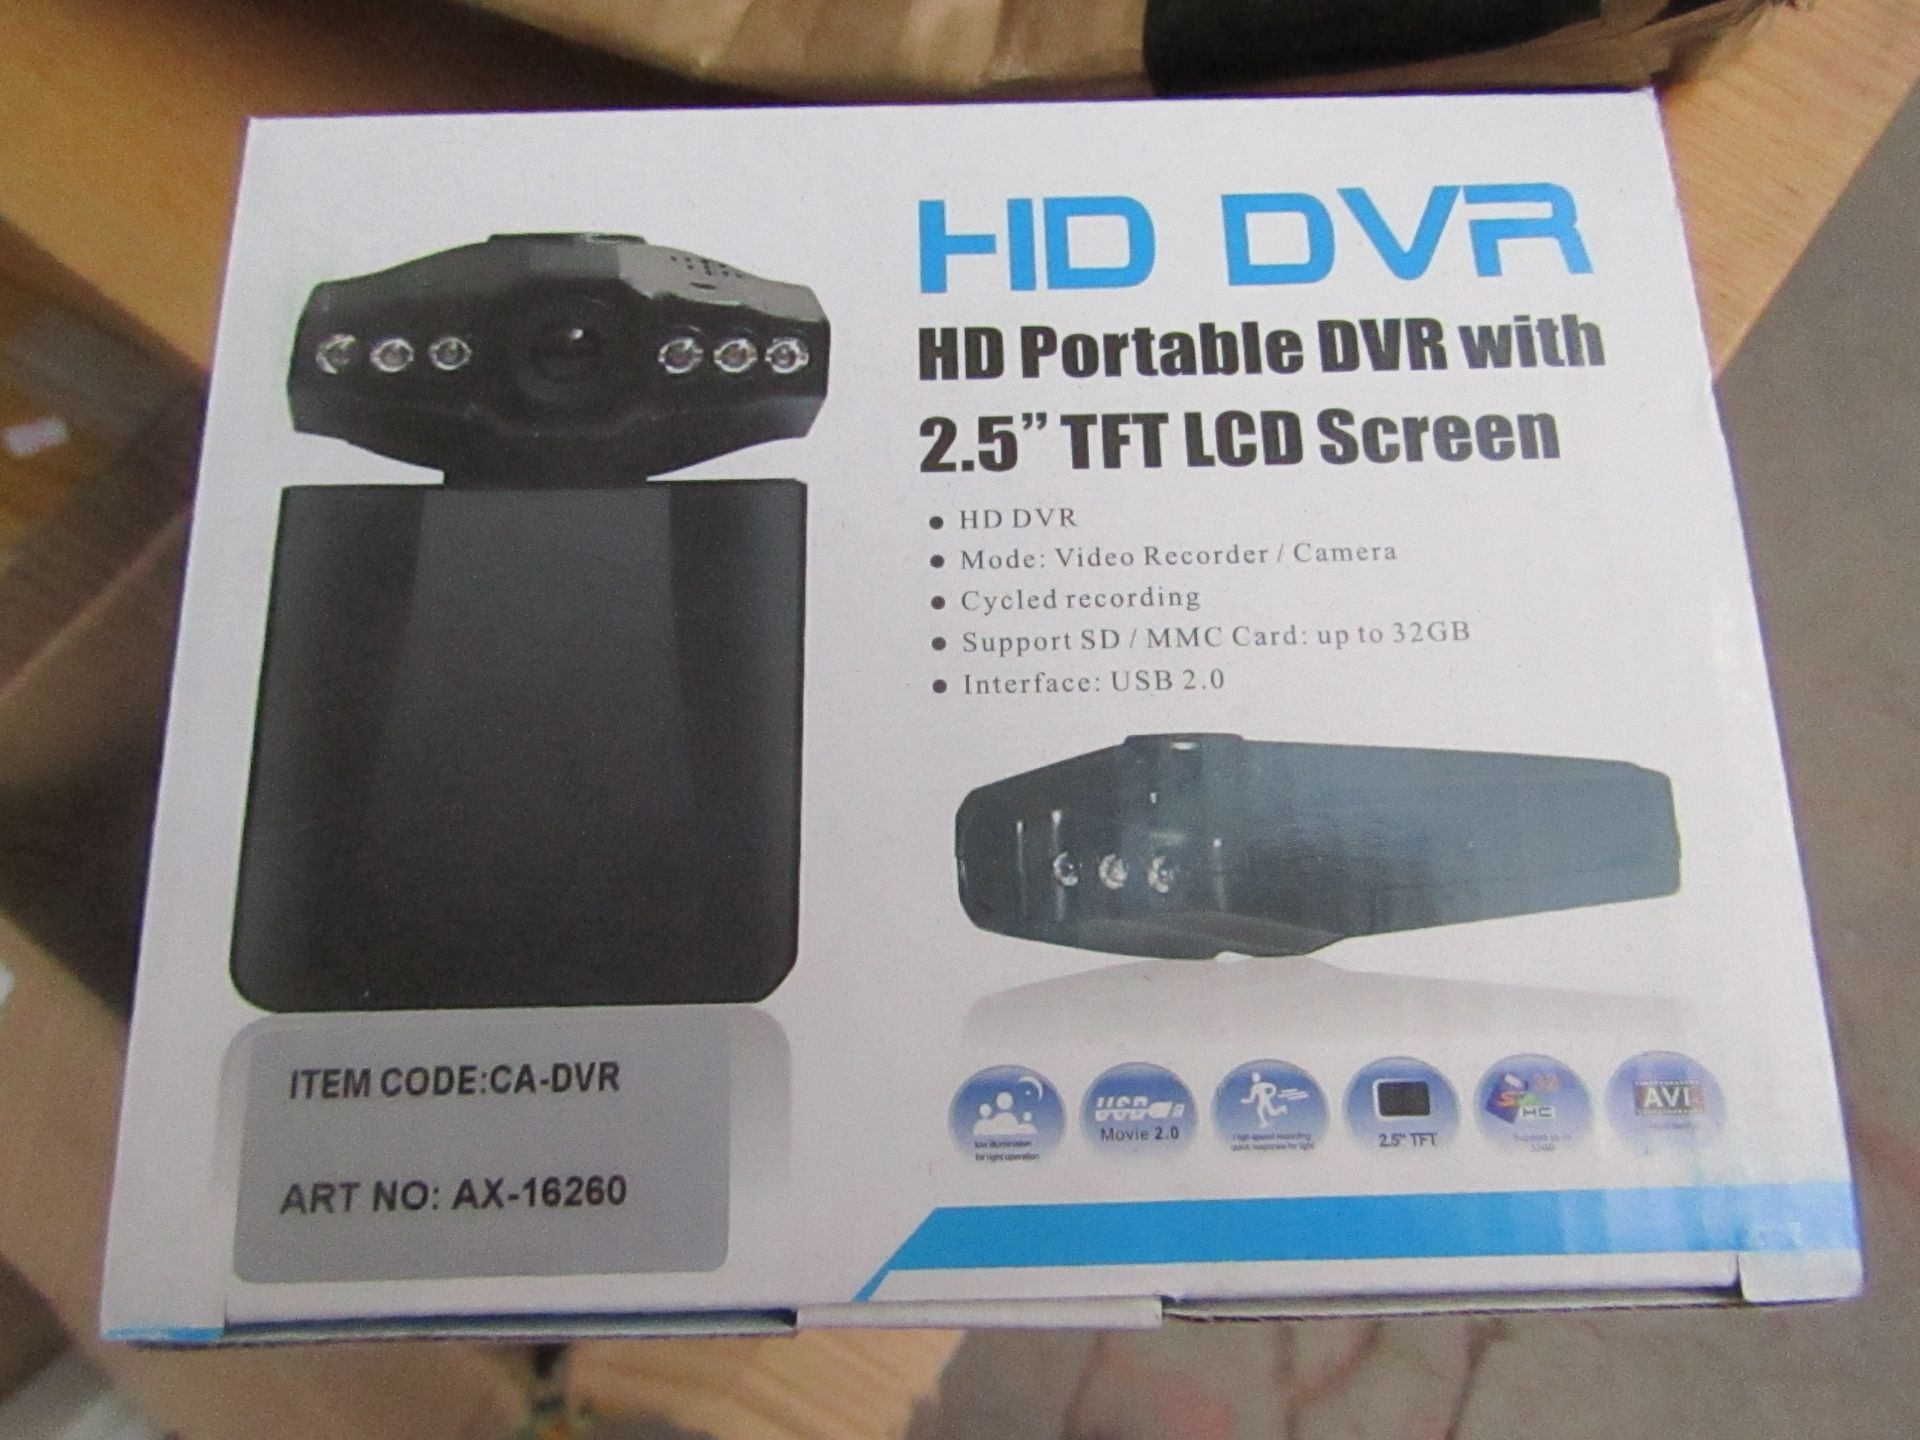 HD HVR Portable DVR with 2.5 tft lcd screen, new in box.